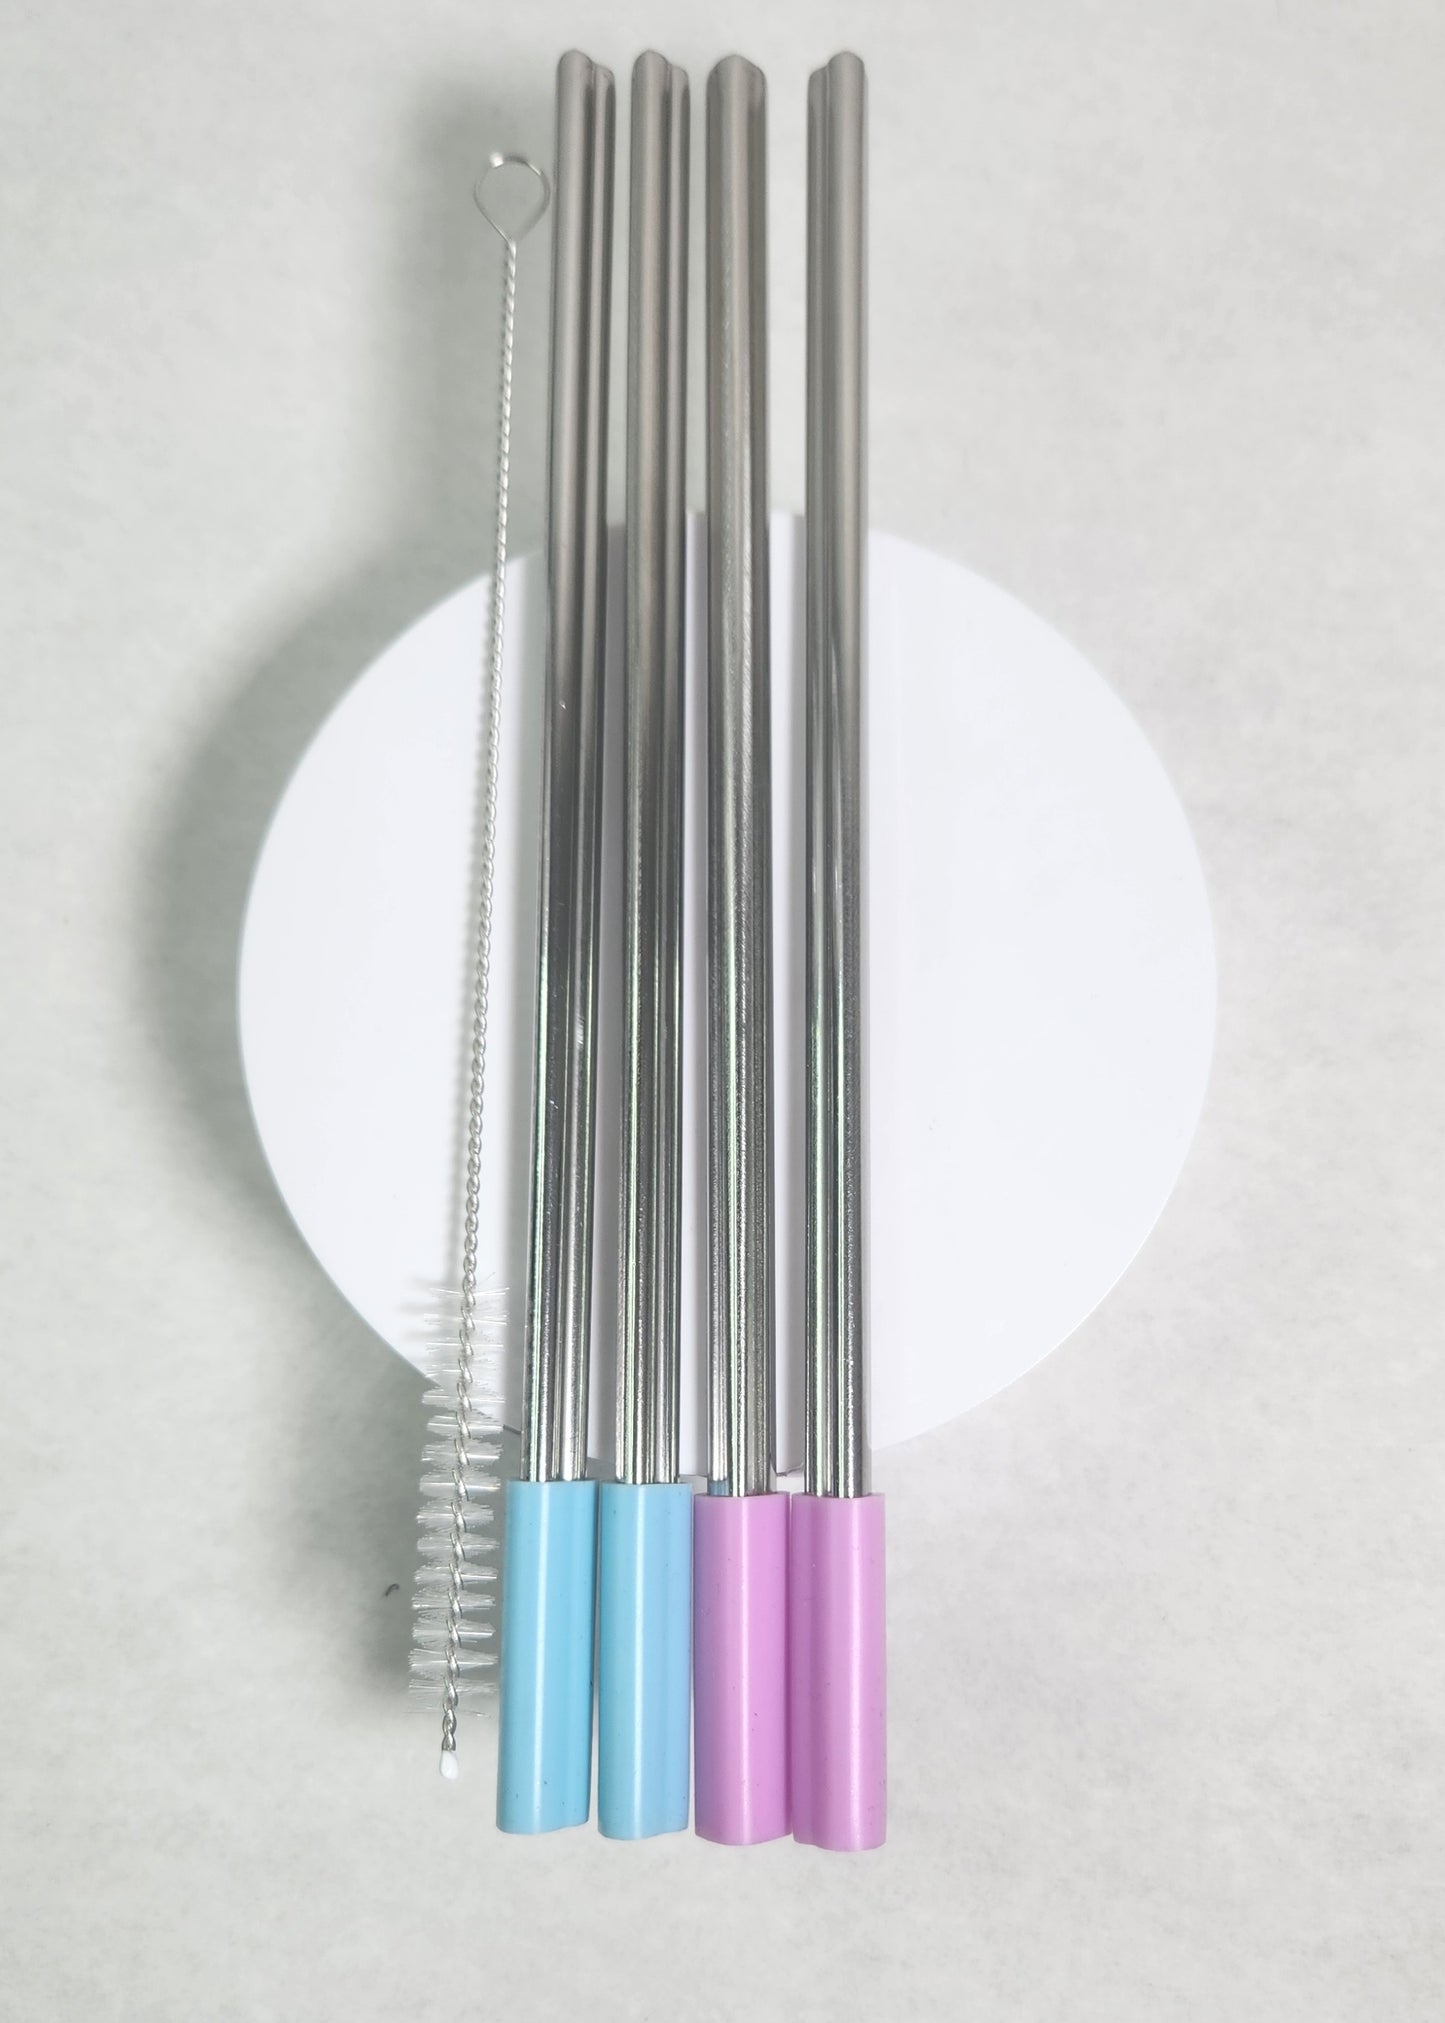 4 Pack - Heart Shaped 8.5 inch Stainless Steel Straws